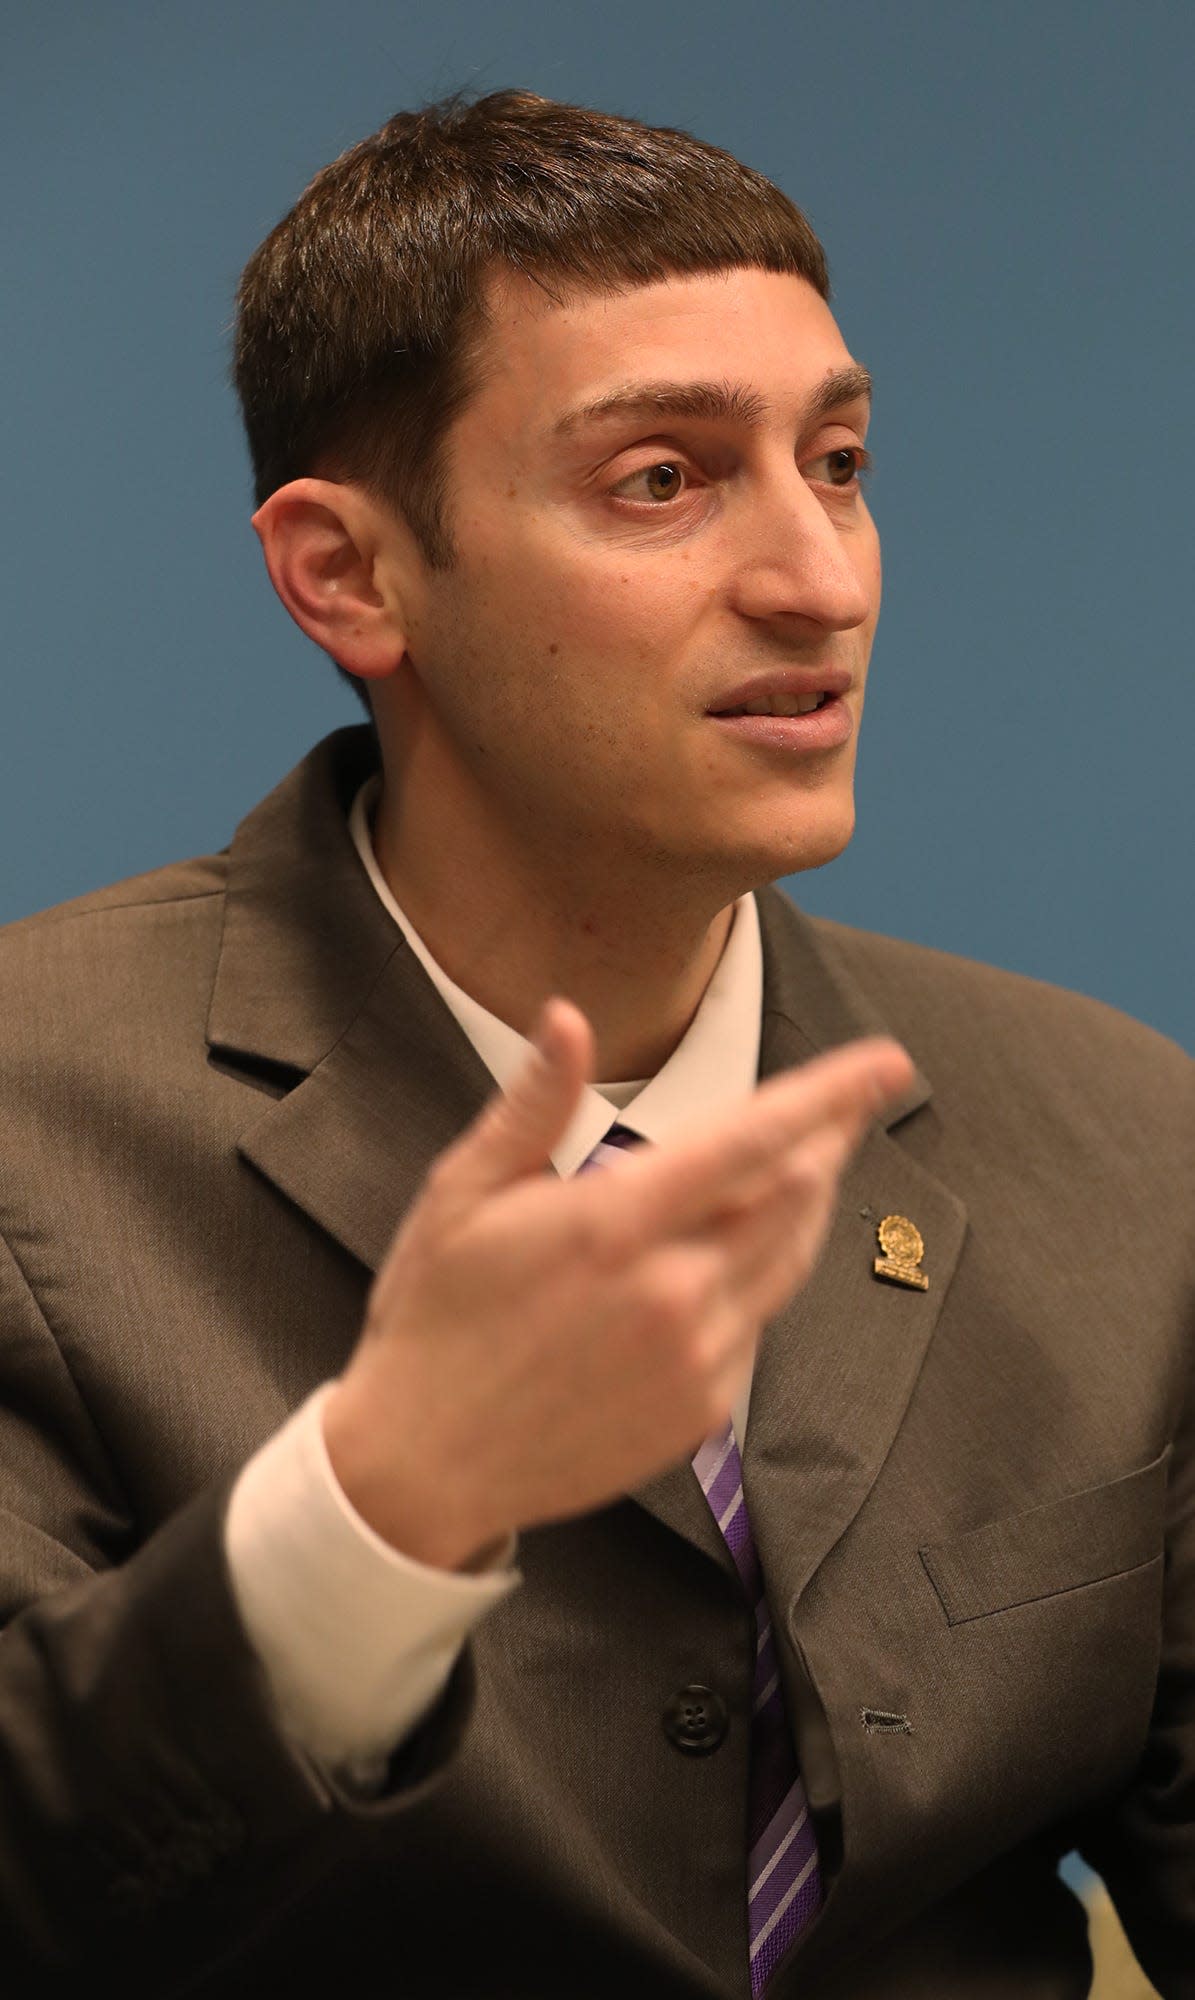 Joshua Schaffer, a candidate for Akron mayor, talks about his candidacy during a recent interview.